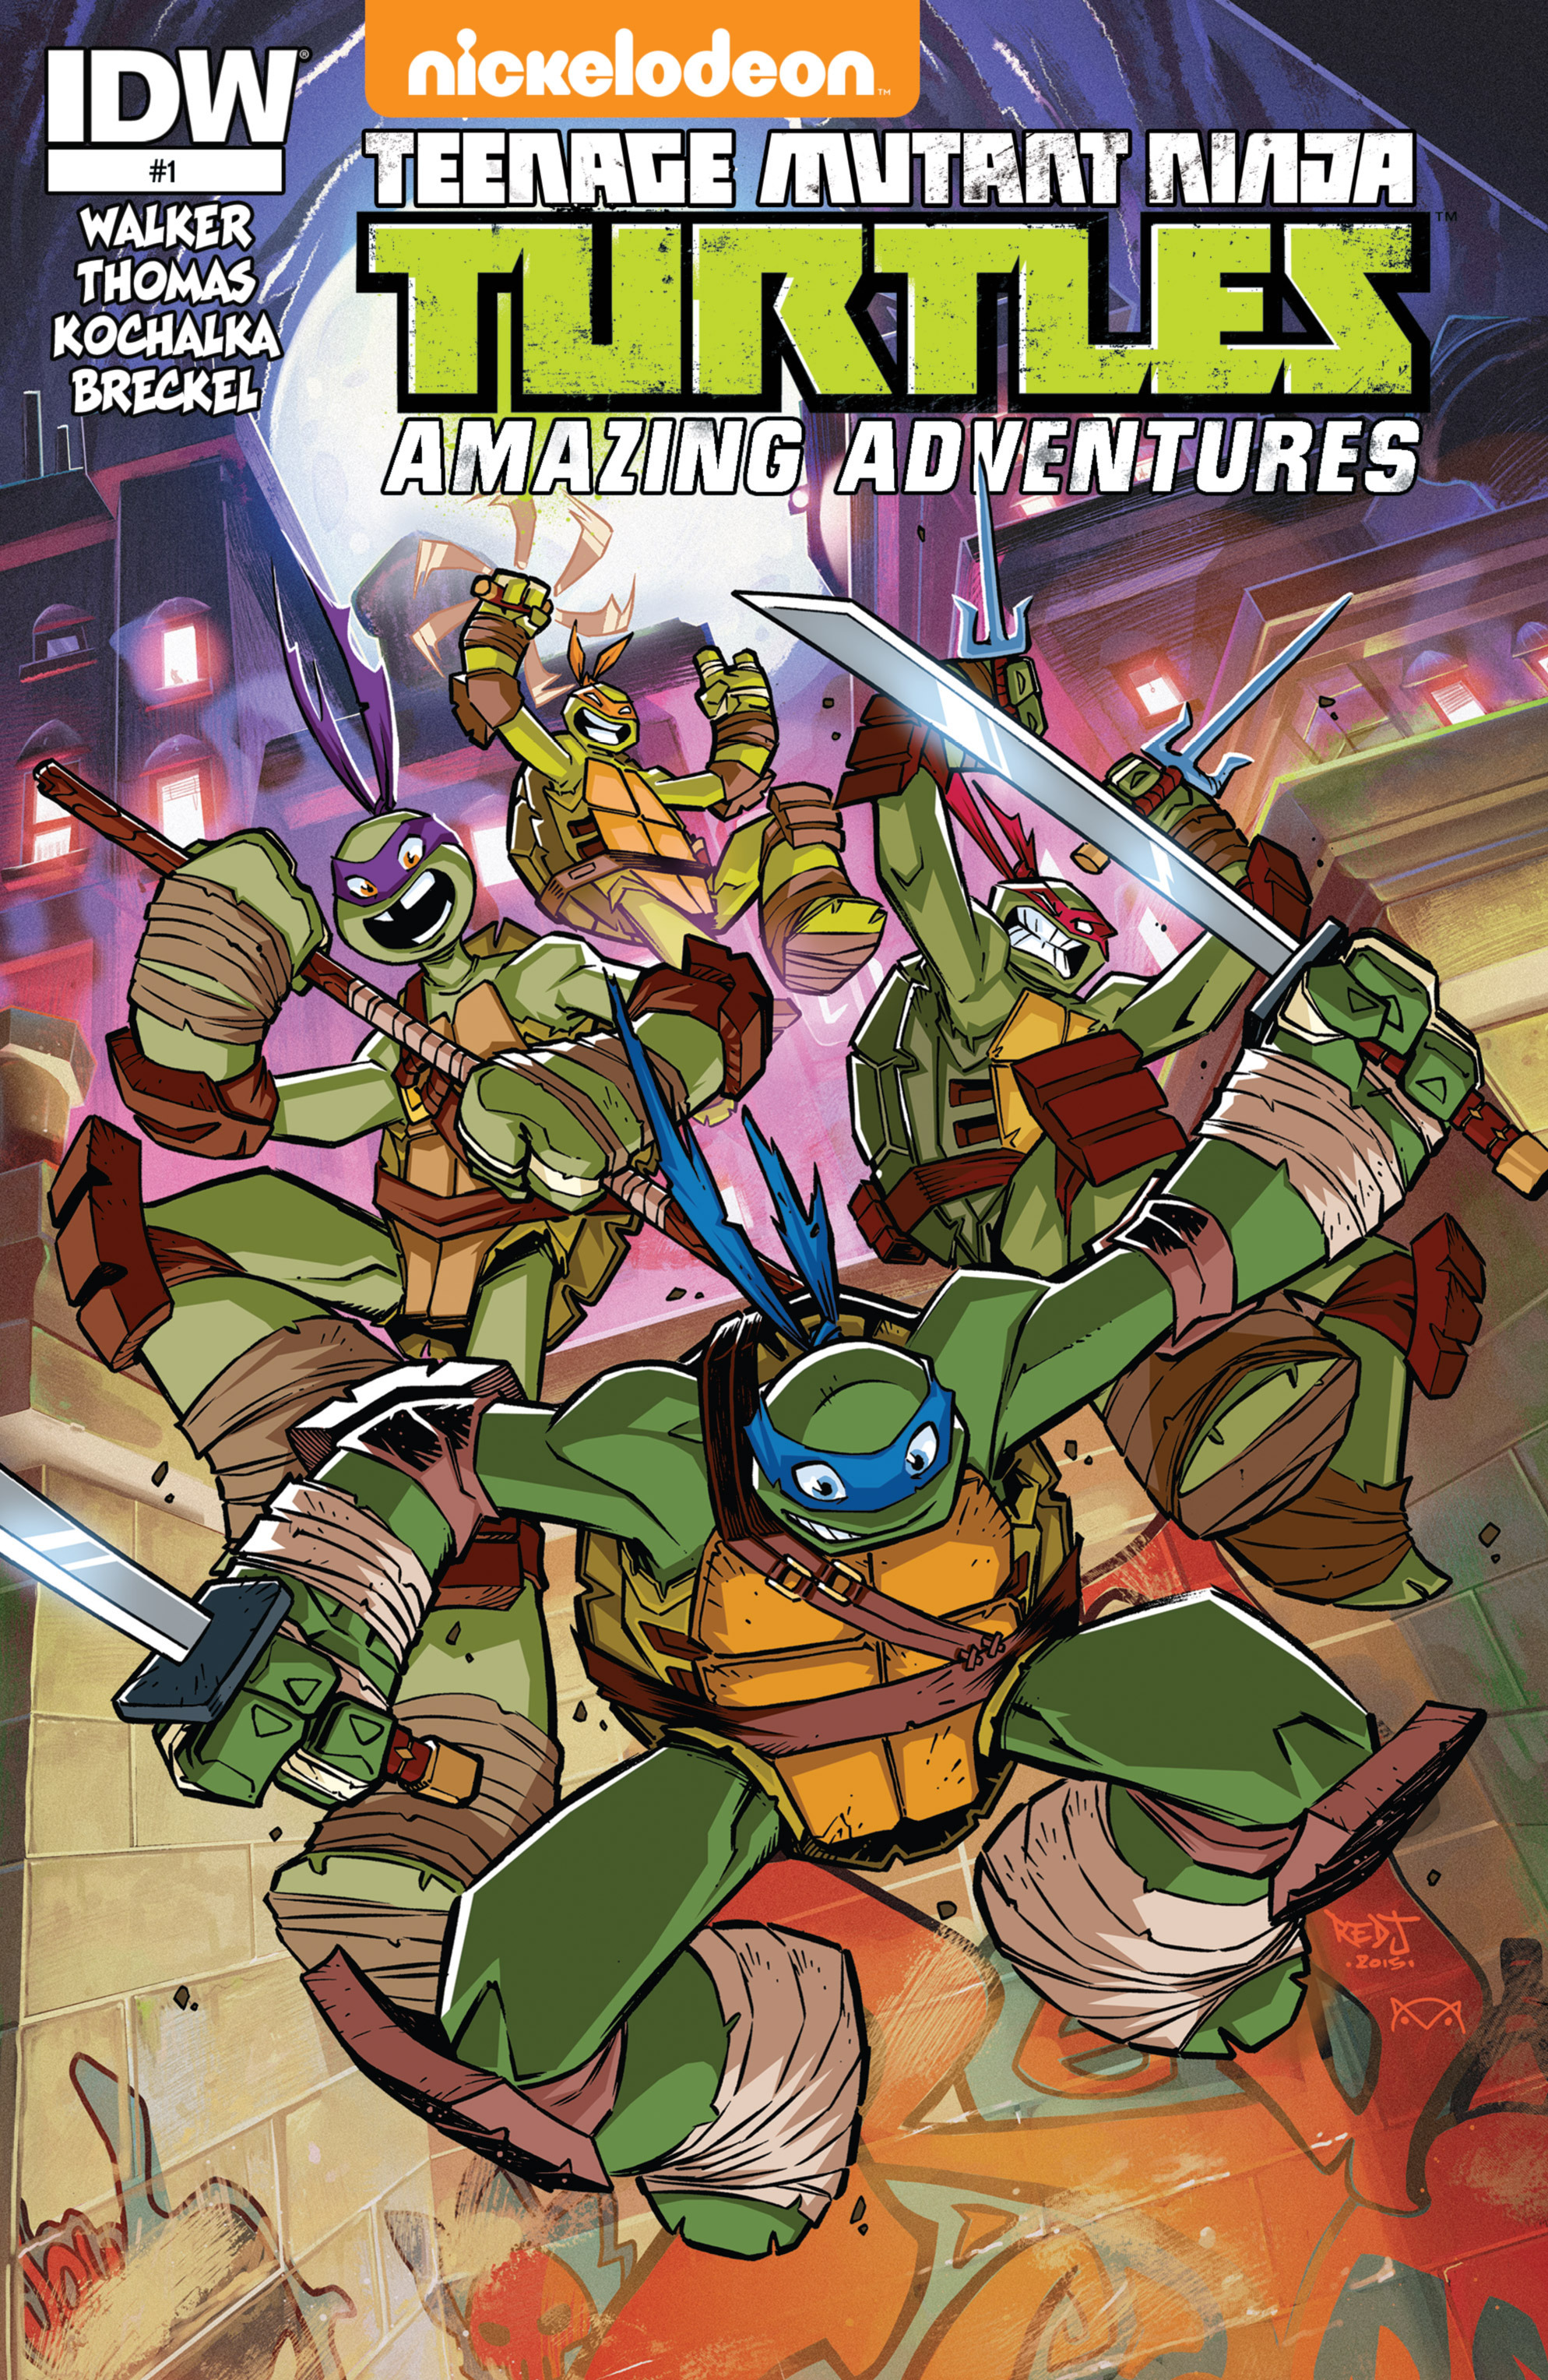 https://static.wikia.nocookie.net/tmnt/images/f/fc/Amazing_Adventures_001.jpg/revision/latest?cb=20151026060616